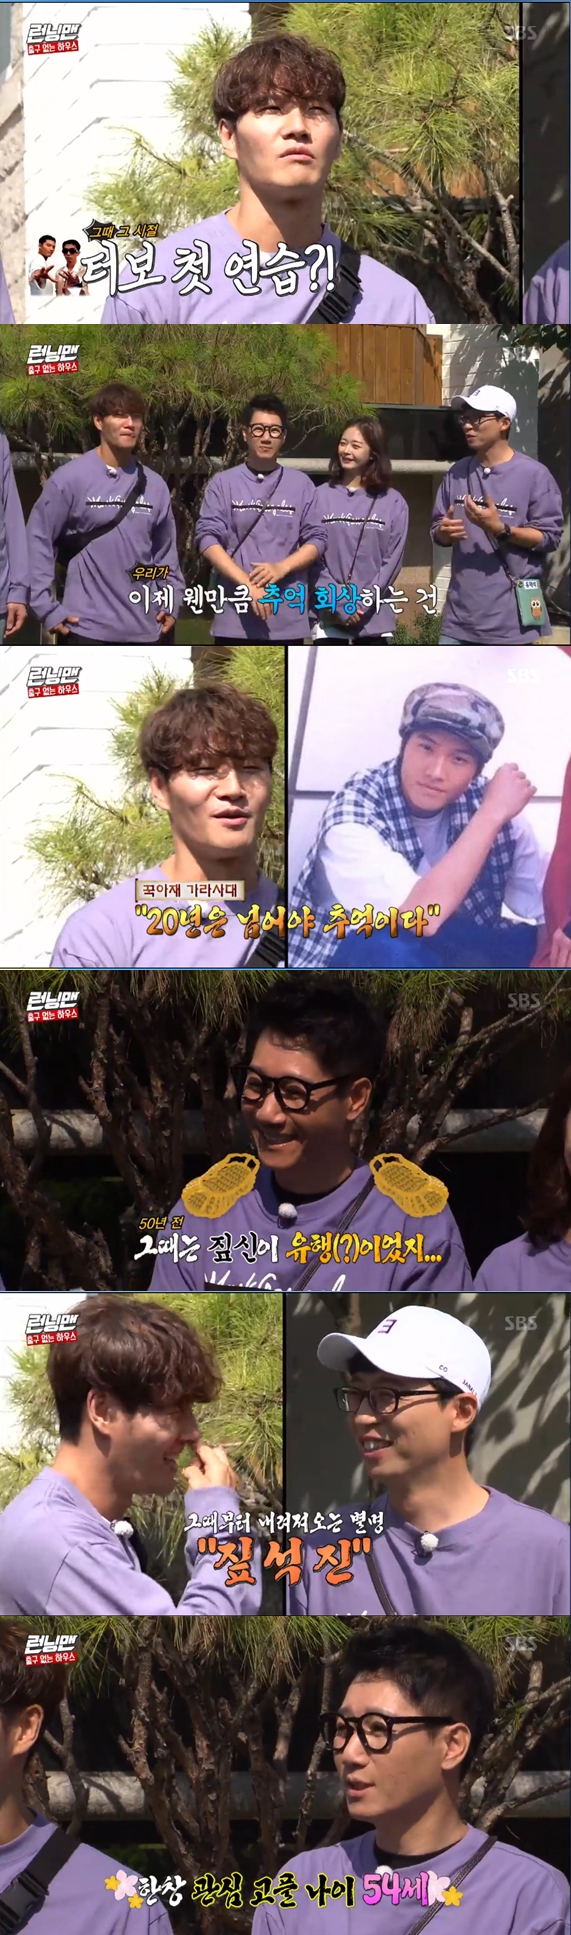 Ji Suk-jin has become the mountain of history Innocent Witness.On the afternoon of the 20th, SBS entertainment program Running Man showed members who were fun to make fun of Ji Suk-jin from the opening.Todays recording site was Yeonhui-dong.Kim Jong-kook, who arrived at Yeonhui-dong, recalled the past, saying, The neighborhood I practiced during the turbo was Yeonhui-dong.So Yoo Jae-Suk asked, How many years have Turbo been?Kim Jong-kook said, Its been over 20 years, and Yoo Jae-Suk said bitterly, Now the memories are all 20 years ago for us.Kim Jong-kook asked Ji Suk-jin, who was still, Is not your brother a memory of 50 years ago?When Ji Suk-jin could not say anything, Haha continued to tease him, saying, Did you carry a straw with you? The wedge was hit by Yoo Jae-Suk.Yoo Jae-Suk laughed when he said, Ji Suk-jins nickname is Ji Suk-jin.